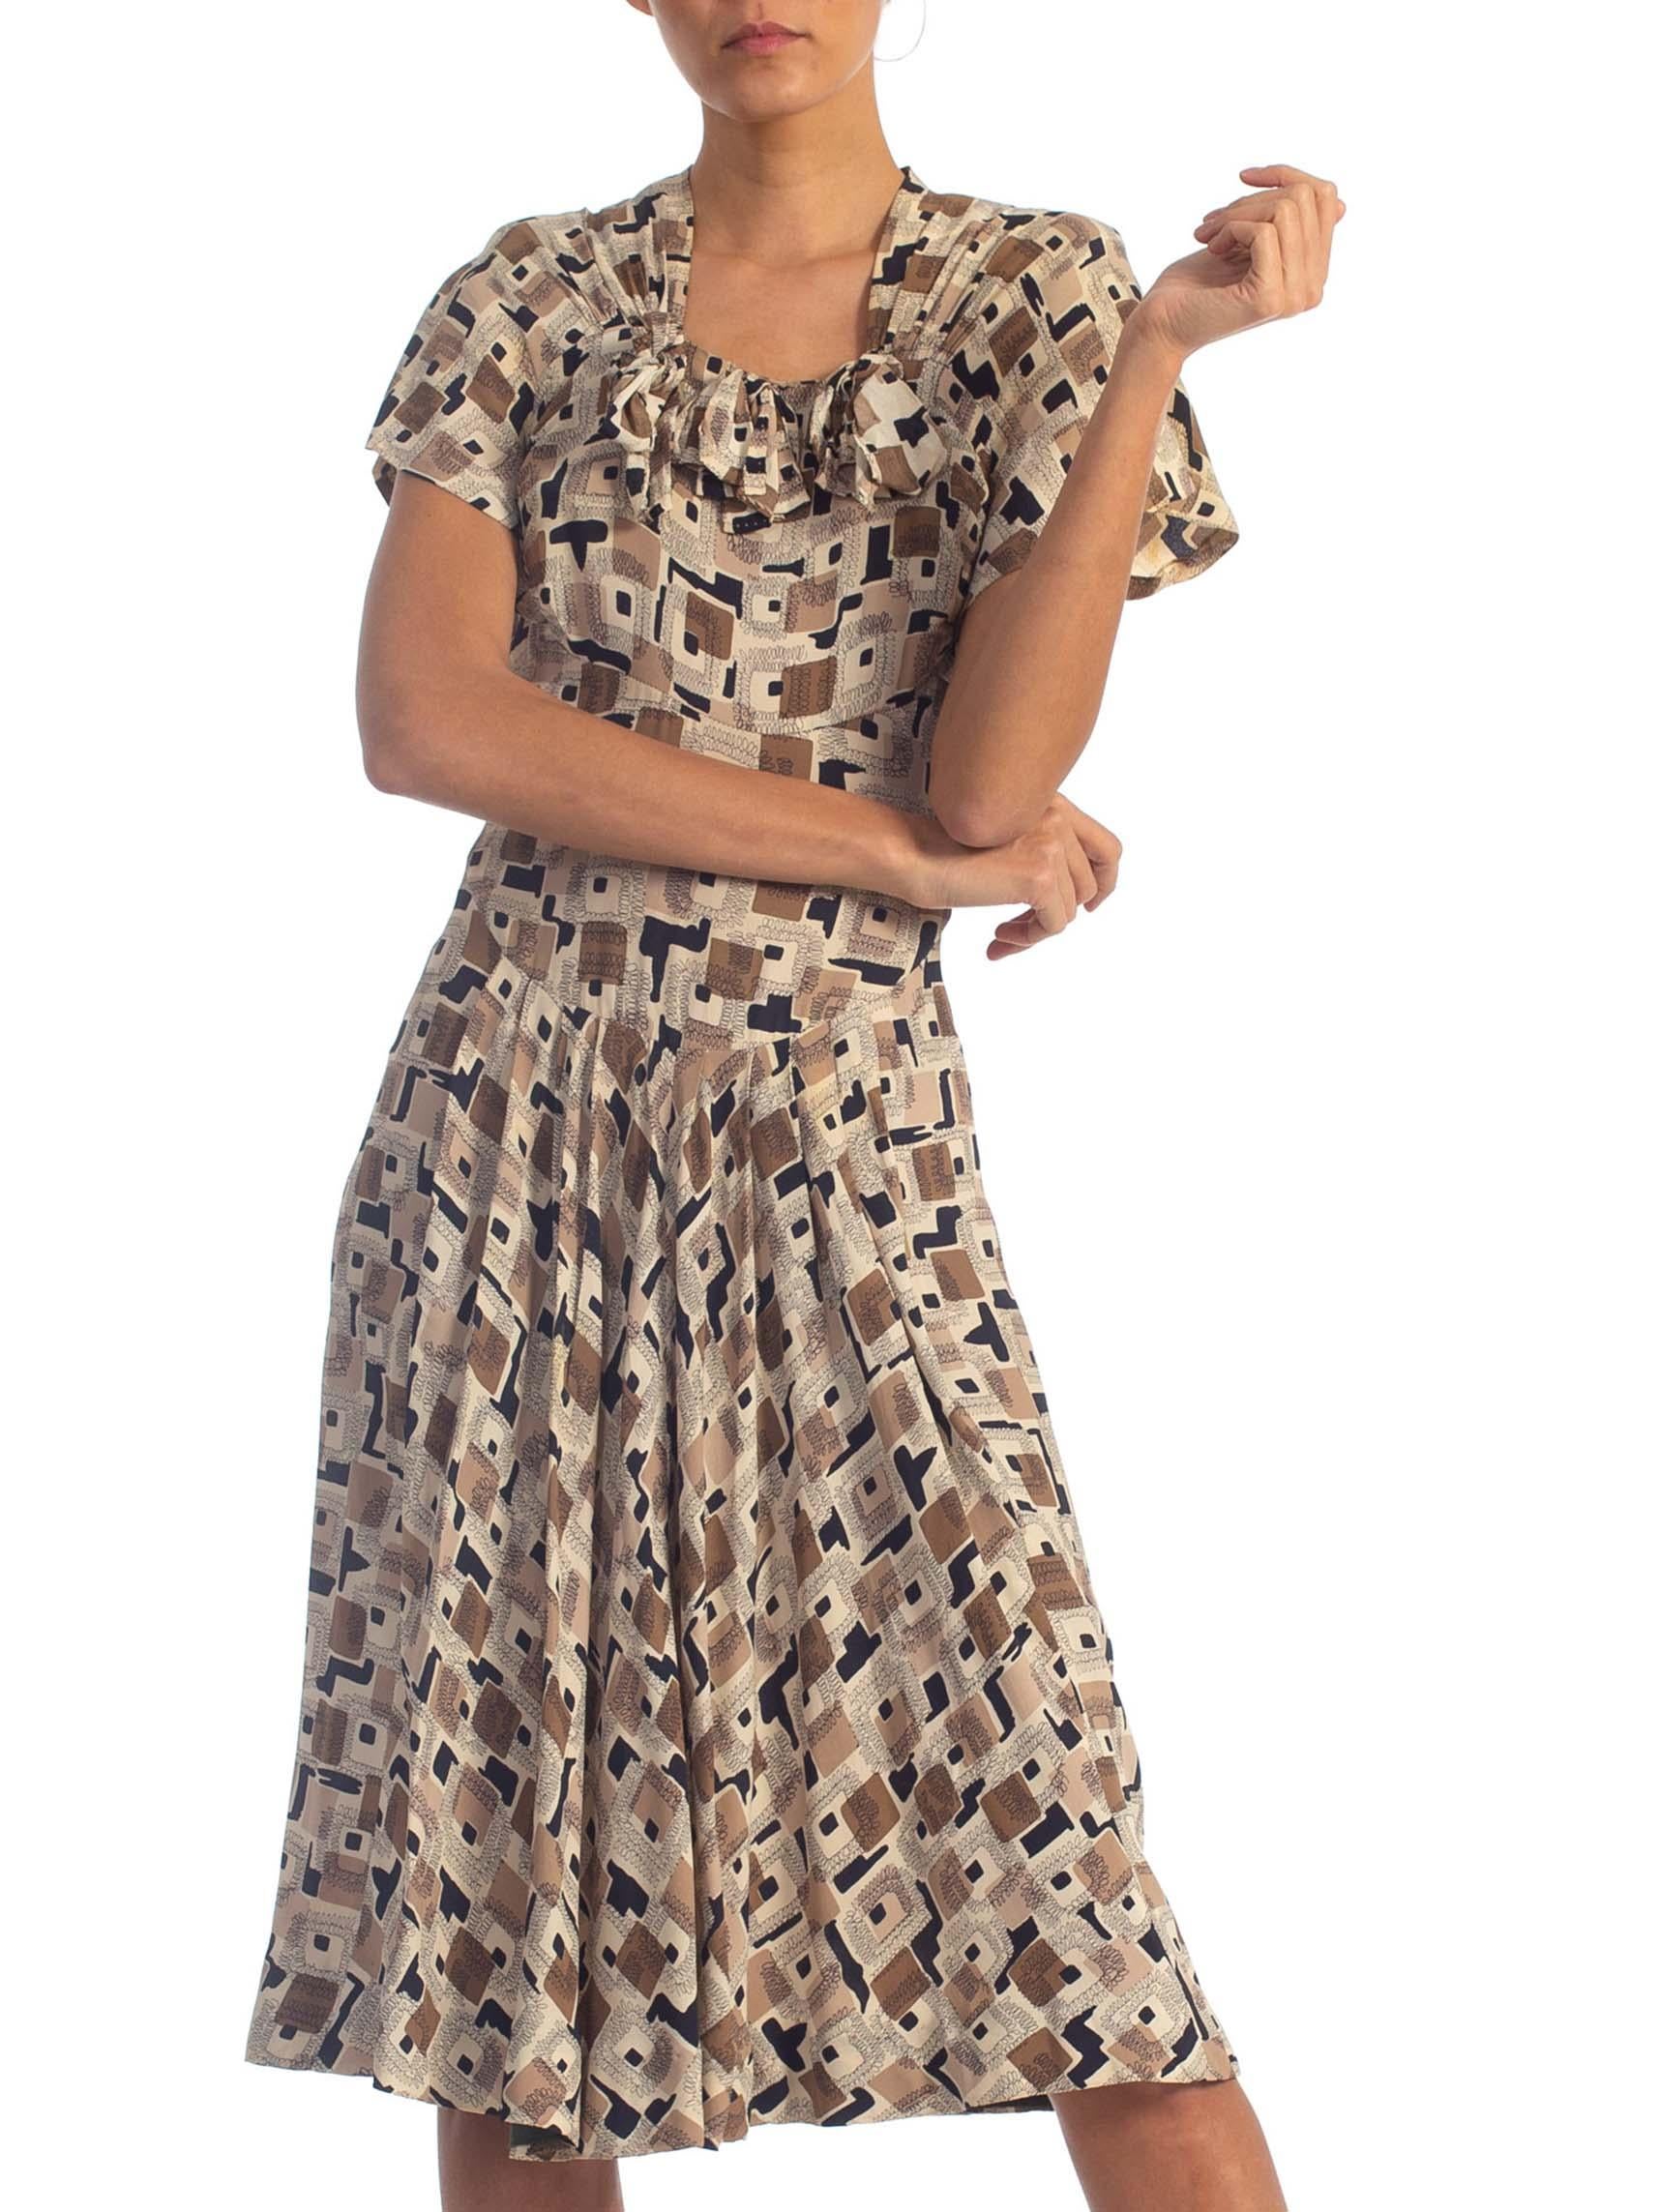 1940S Printed Rayon Crepe Dress With Bows & Pockets For Sale 2